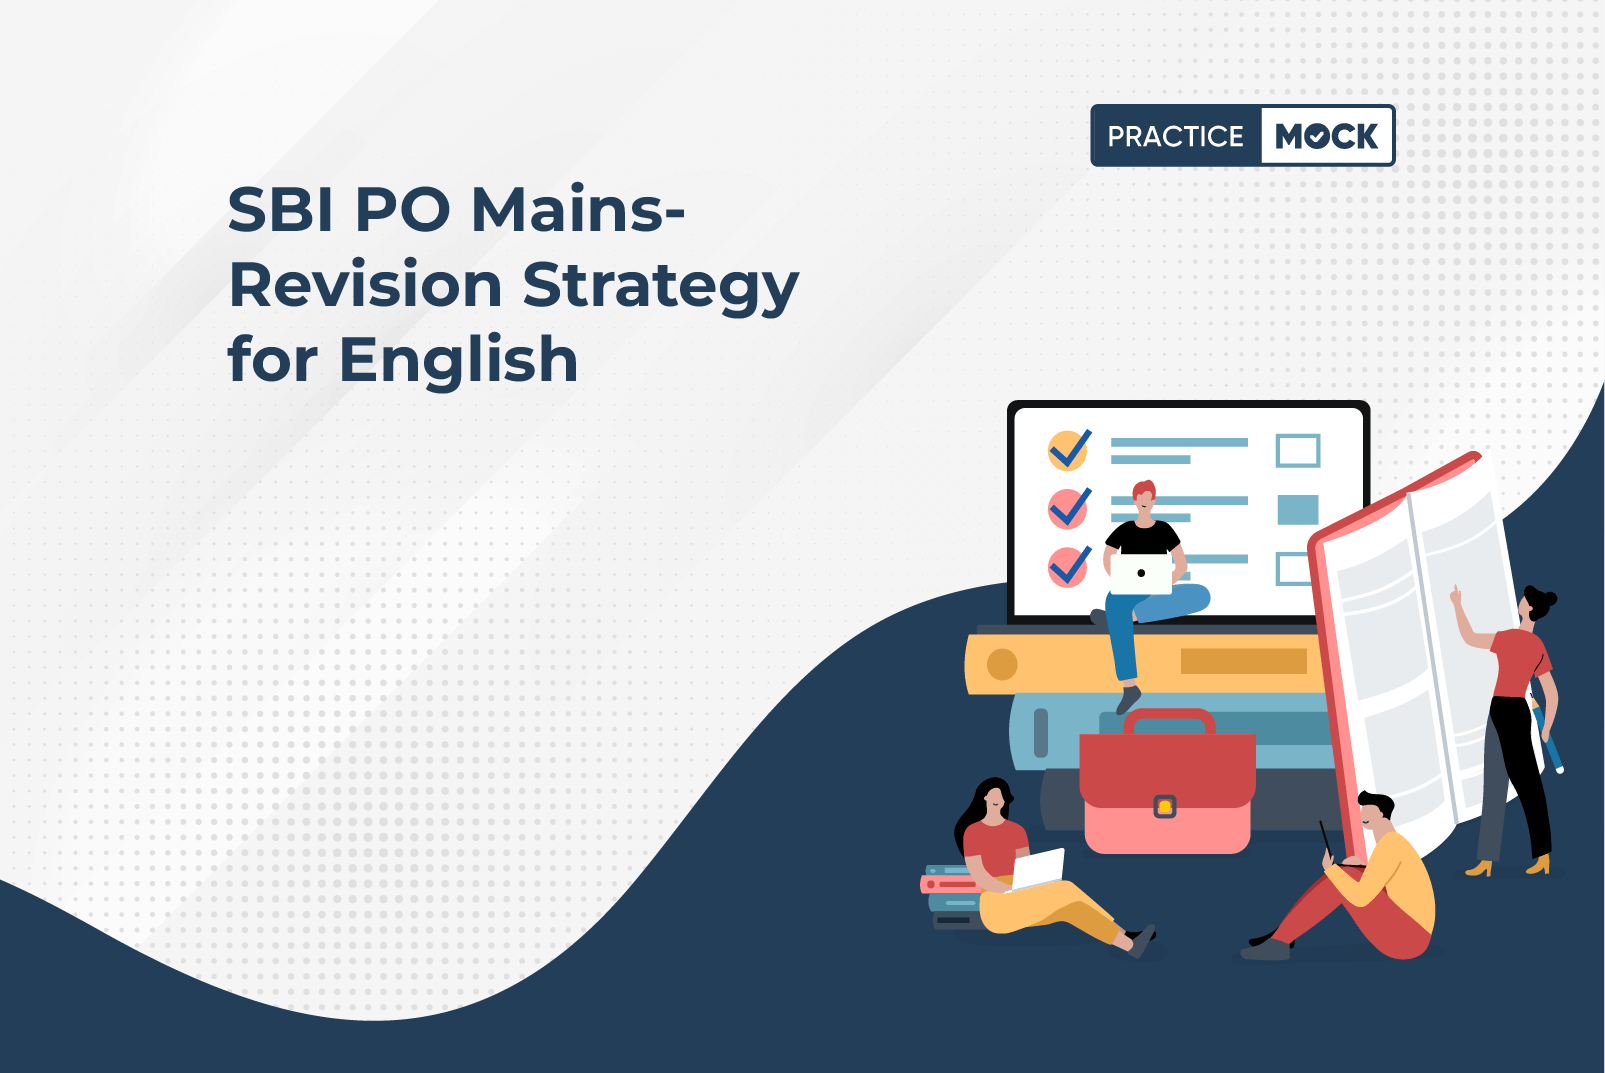 SBI PO Mains- Revision Strategy for English (1)